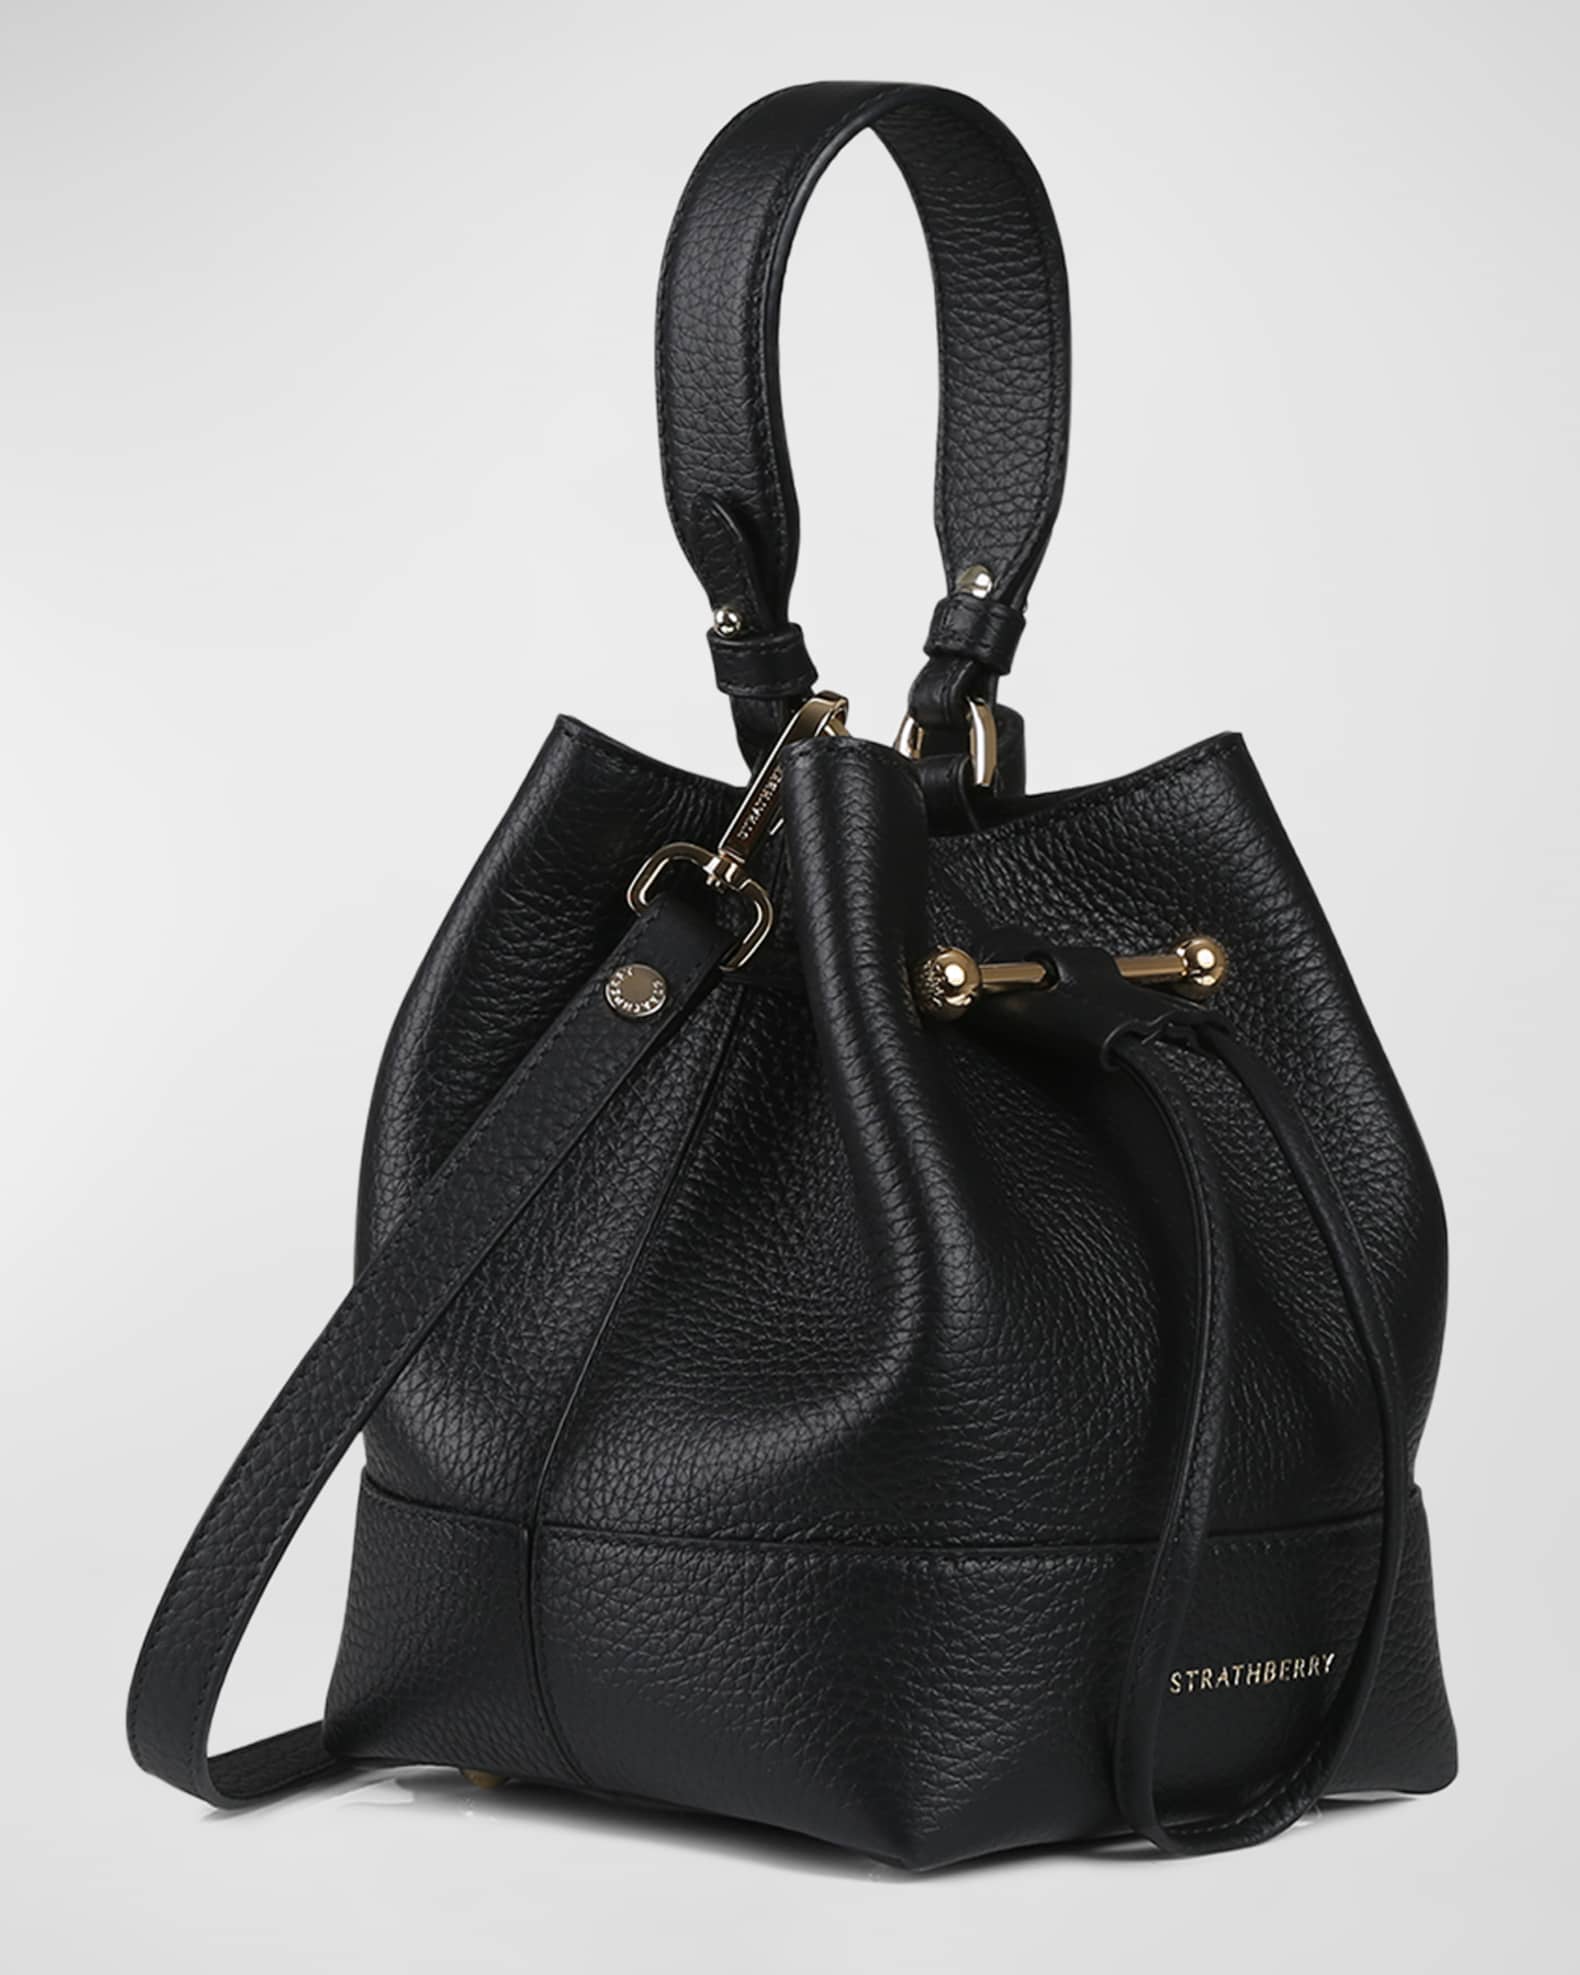 AUTH NWT $555 Strathberry Lana Osette Midi Black Pebbled Leather Bucket Bag  NEW